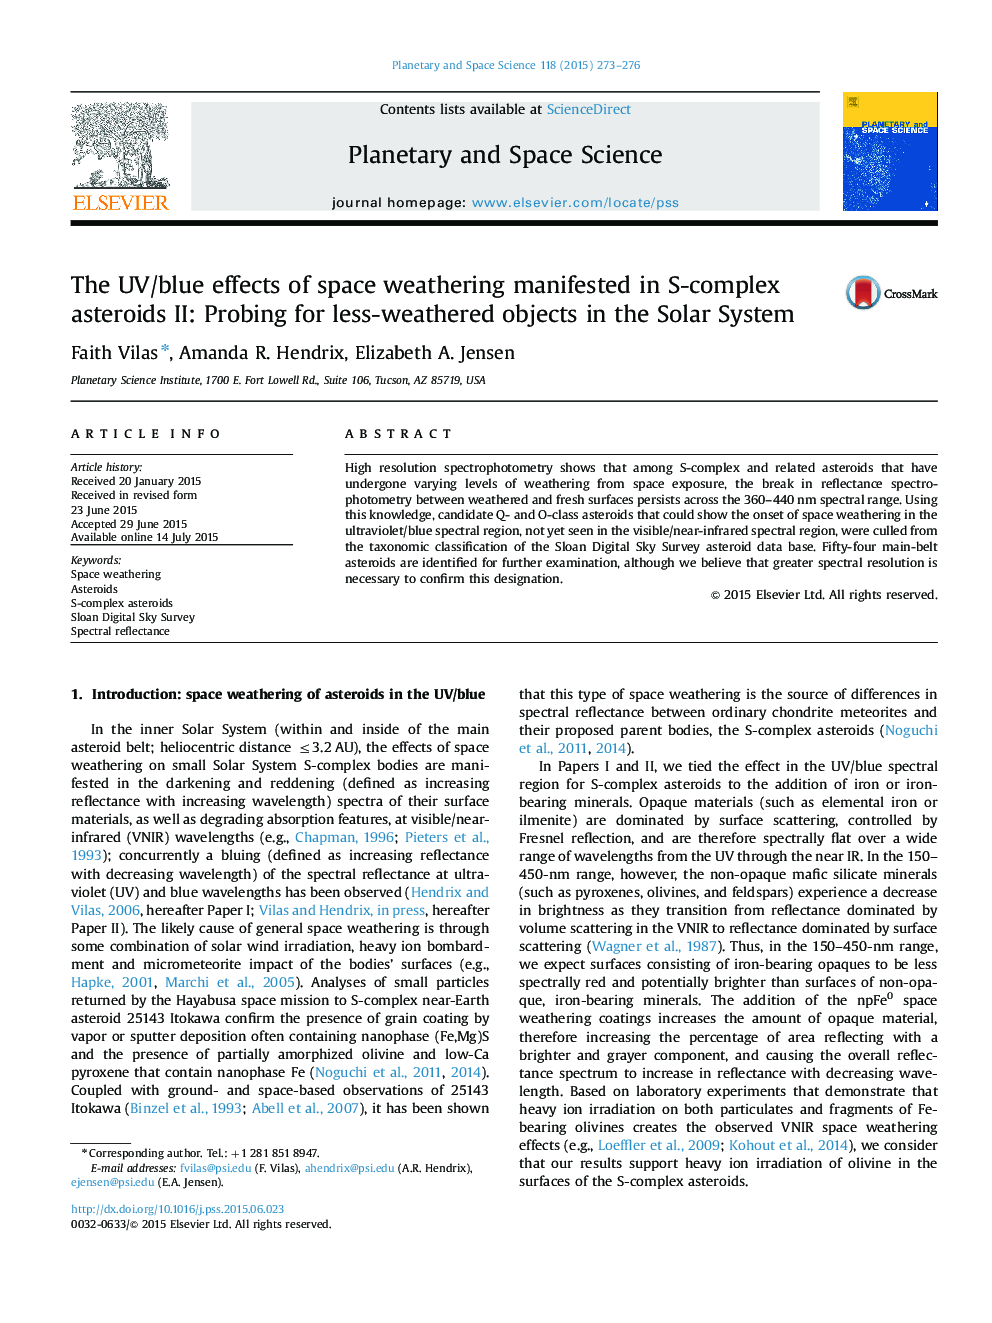 The UV/blue effects of space weathering manifested in S-complex asteroids II: Probing for less-weathered objects in the Solar System